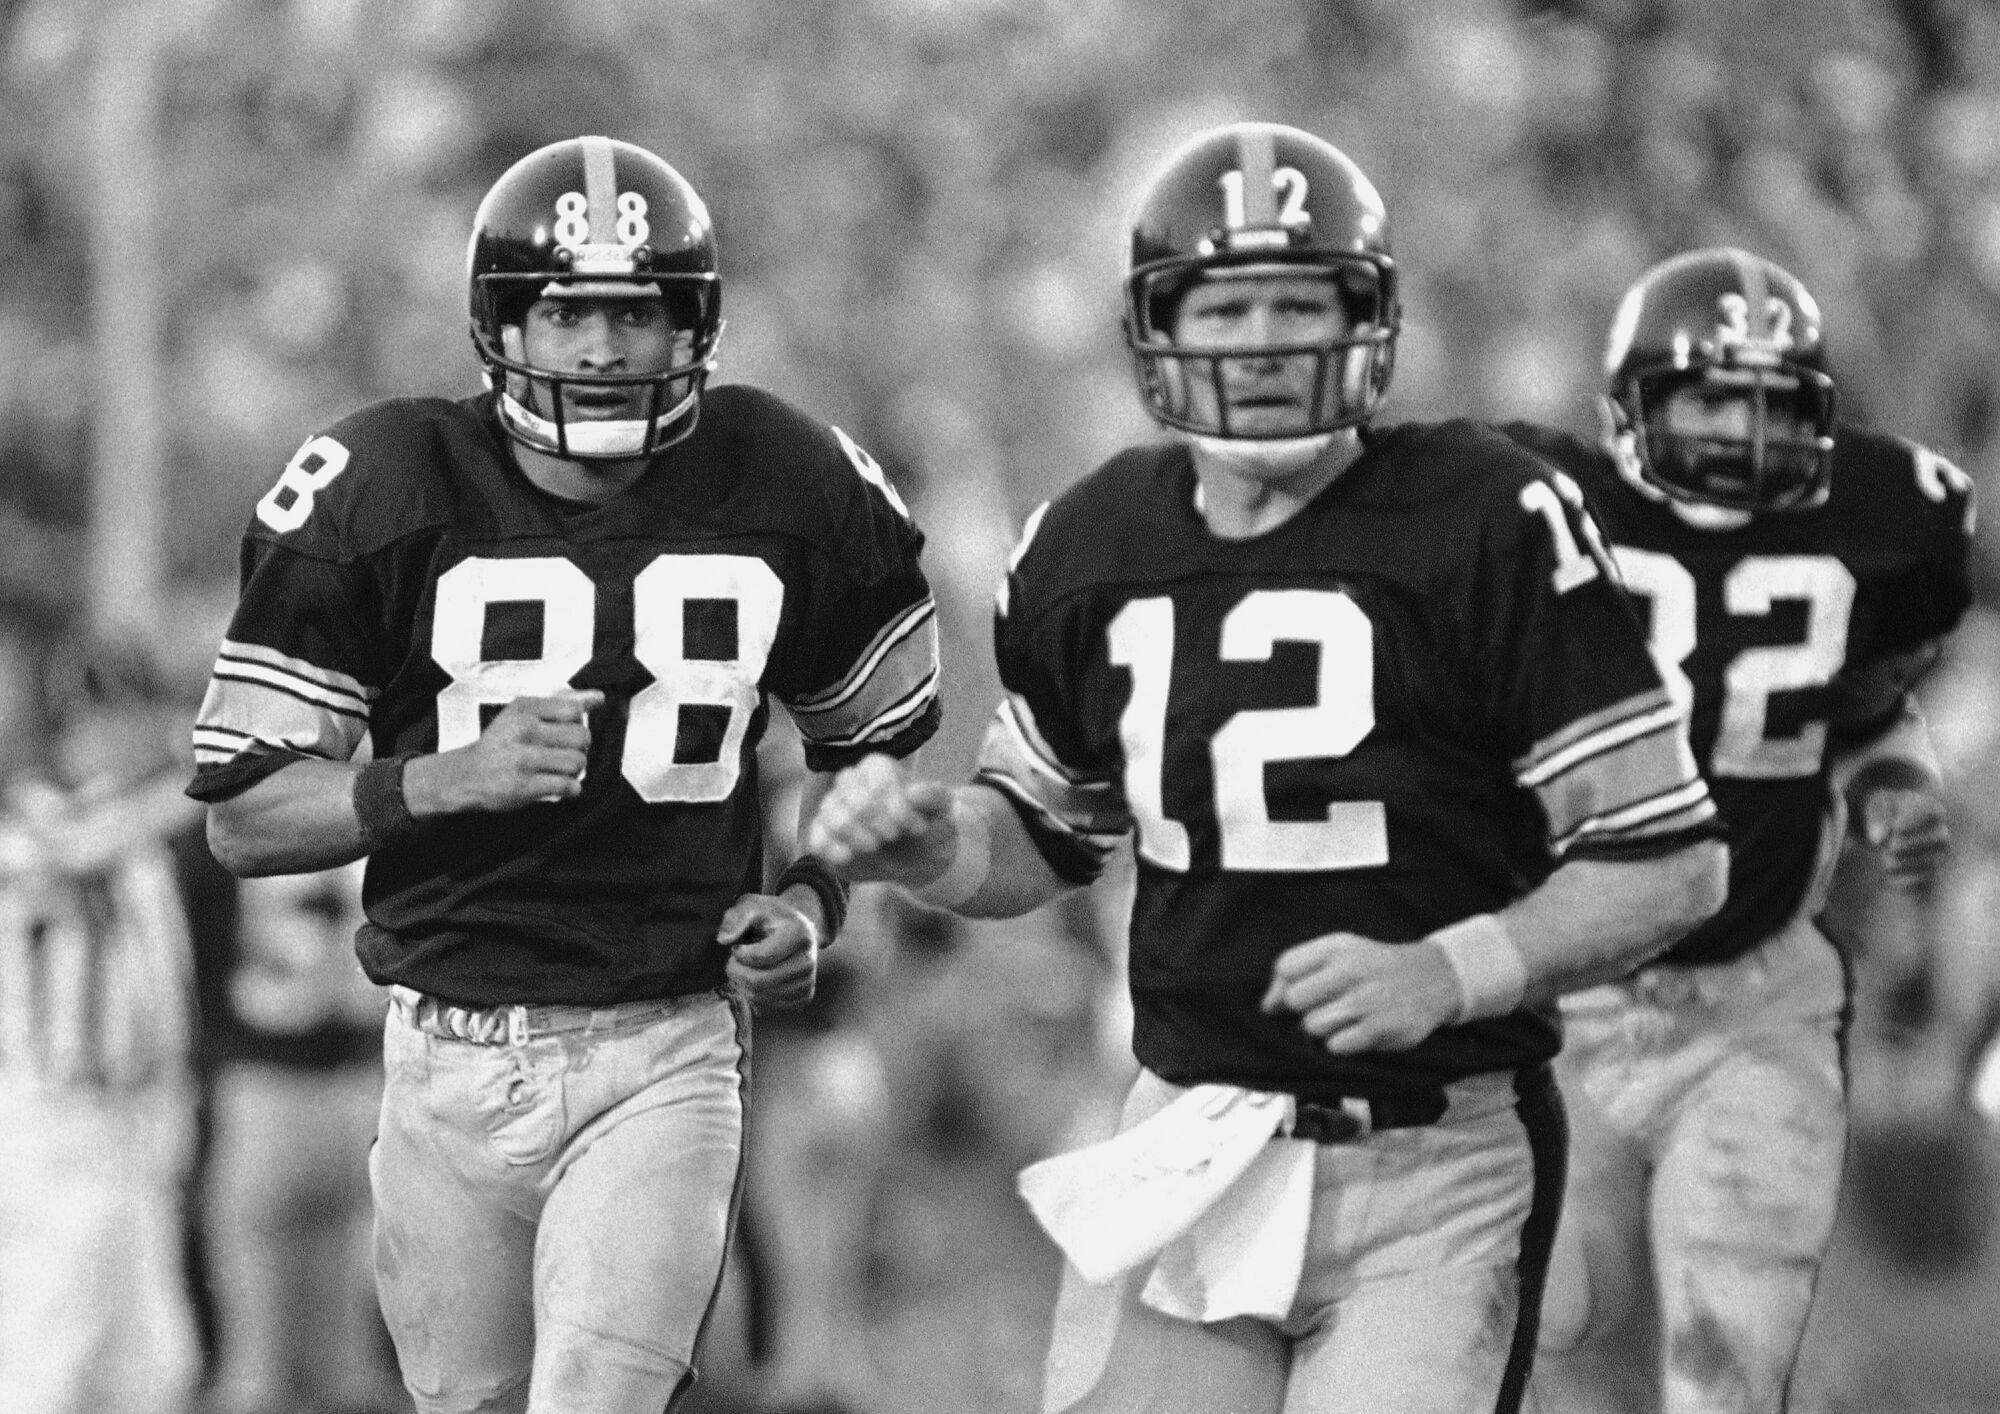 Pittsburgh Steelers receiver Lynn Swann (88) and quarterback Terry Bradshaw (12) look on during Super Bowl XIV.